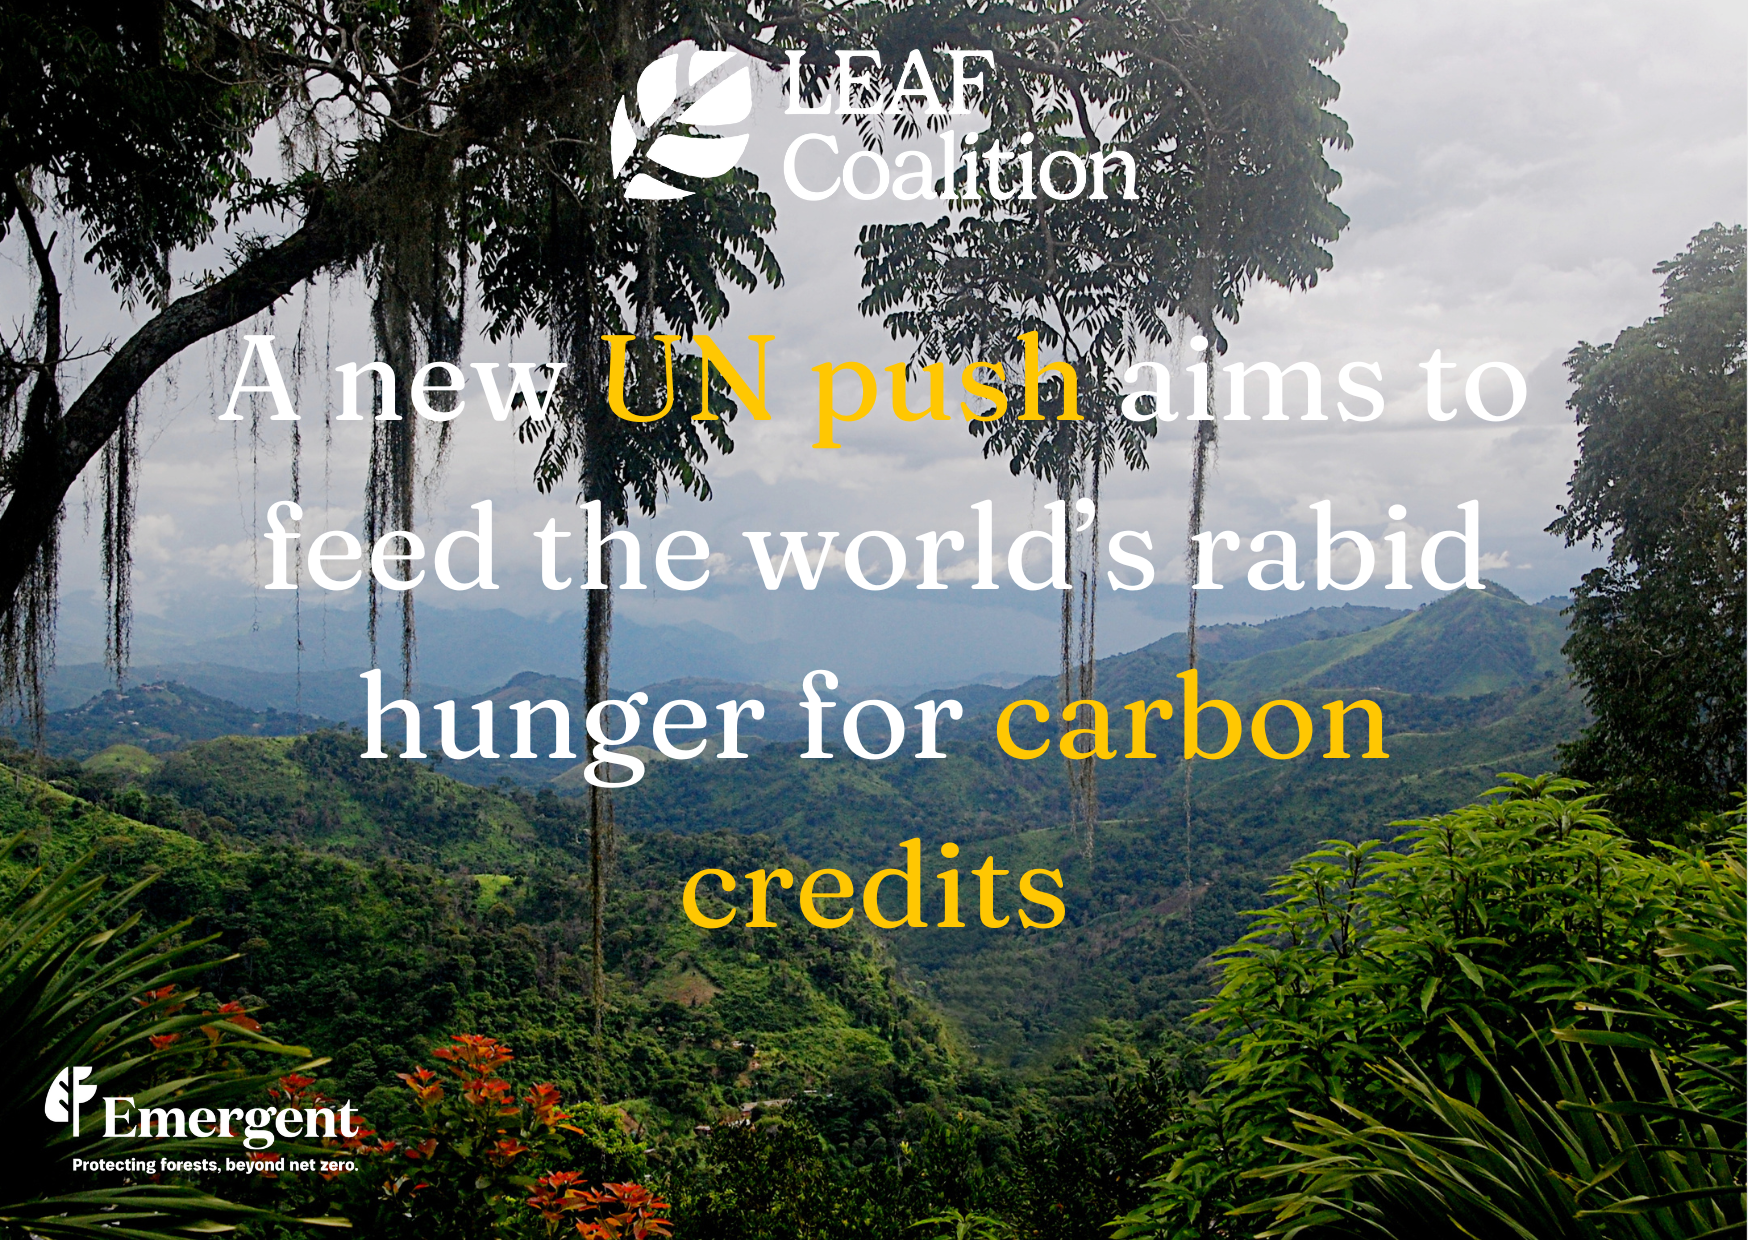 A new UN push aims to feed the world’s rabid hunger for carbon credits